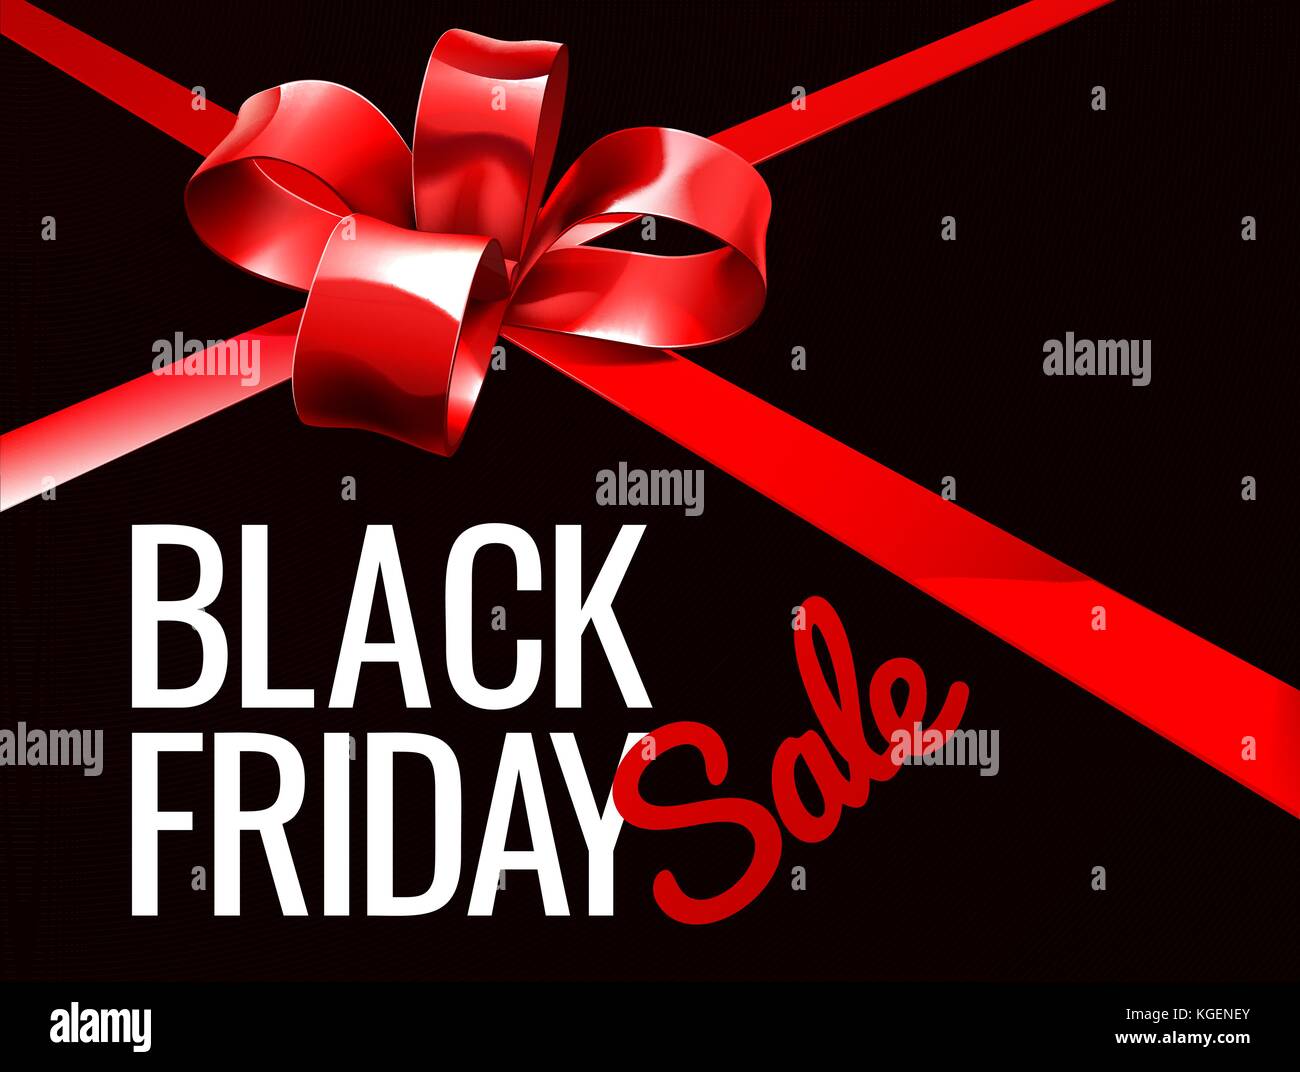 Black Friday Sale Sign Stock Vector